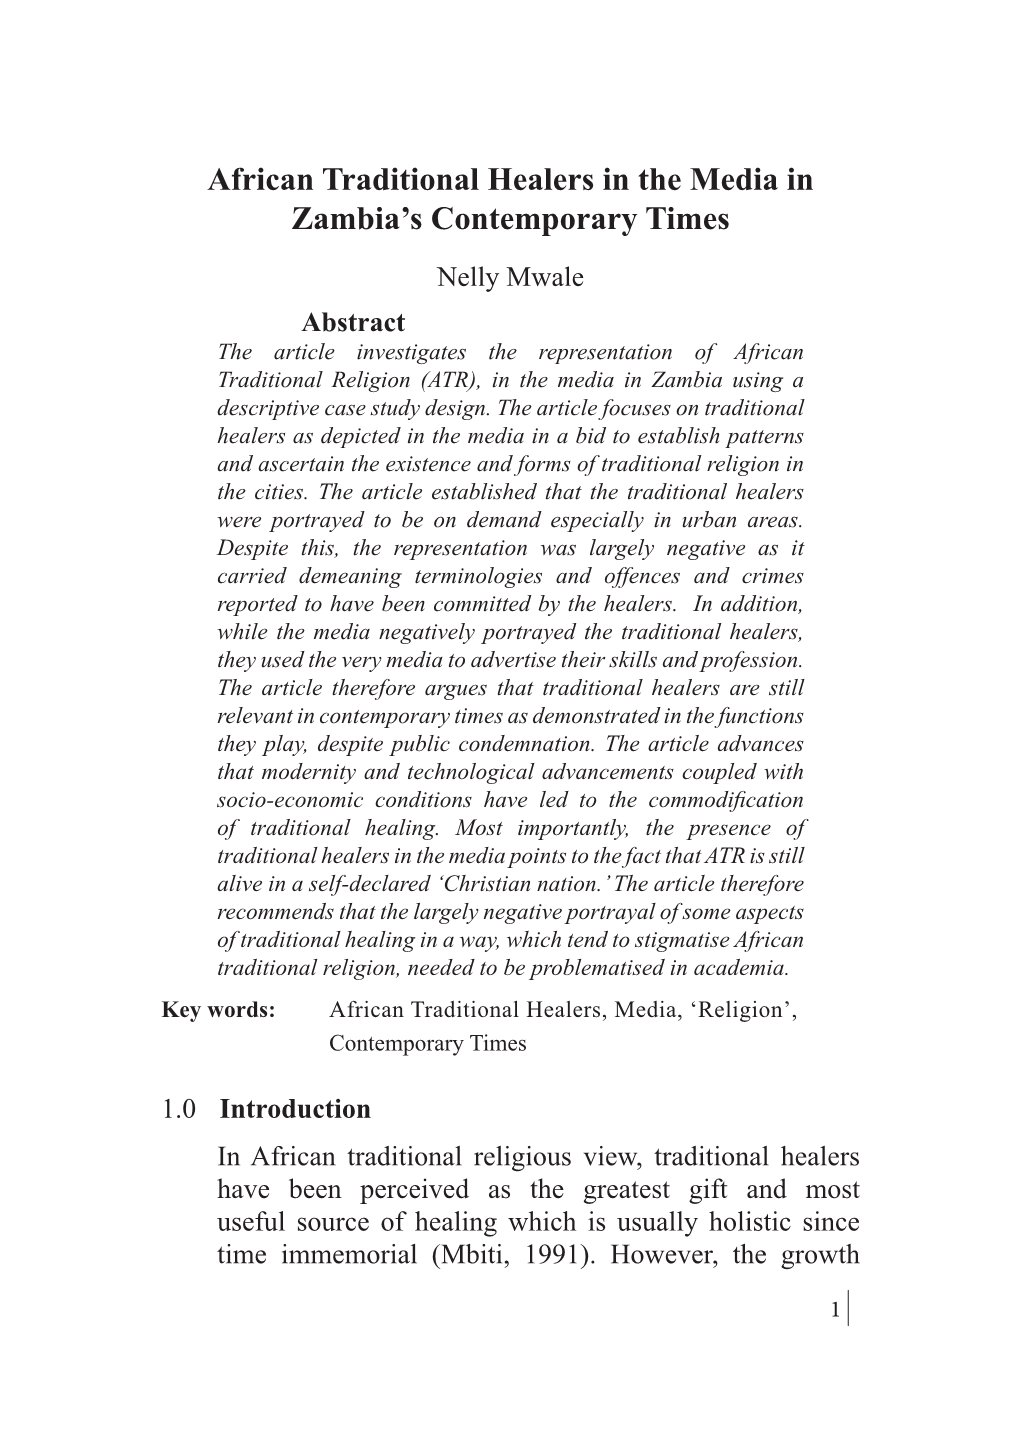 African Traditional Healers in the Media in Zambia's Contemporary